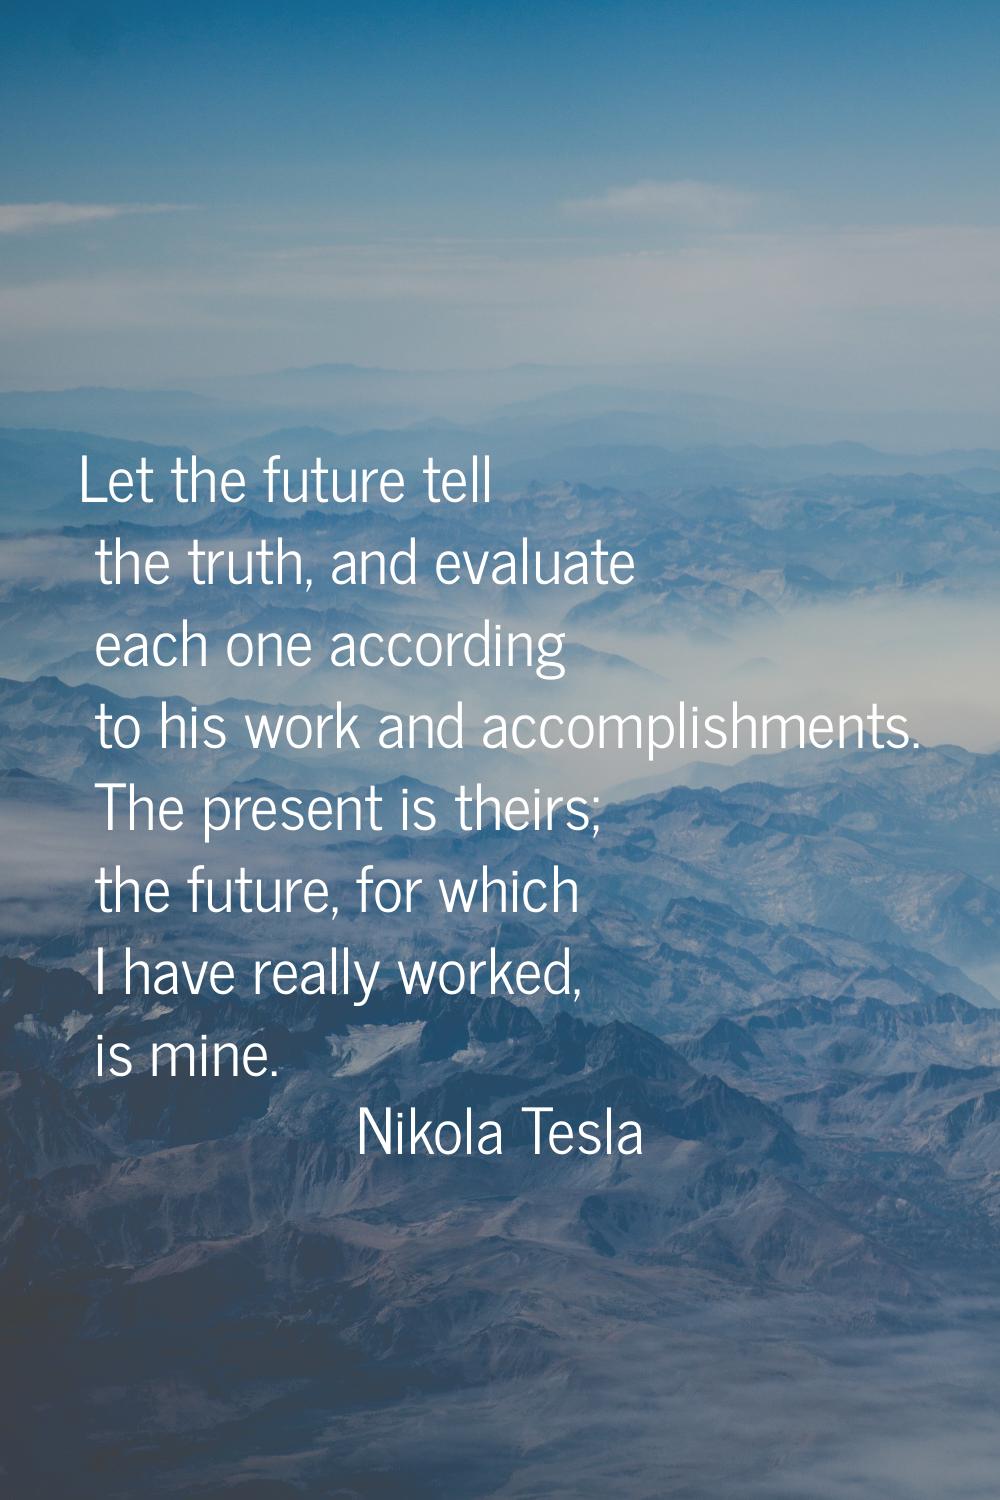 Let the future tell the truth, and evaluate each one according to his work and accomplishments. The